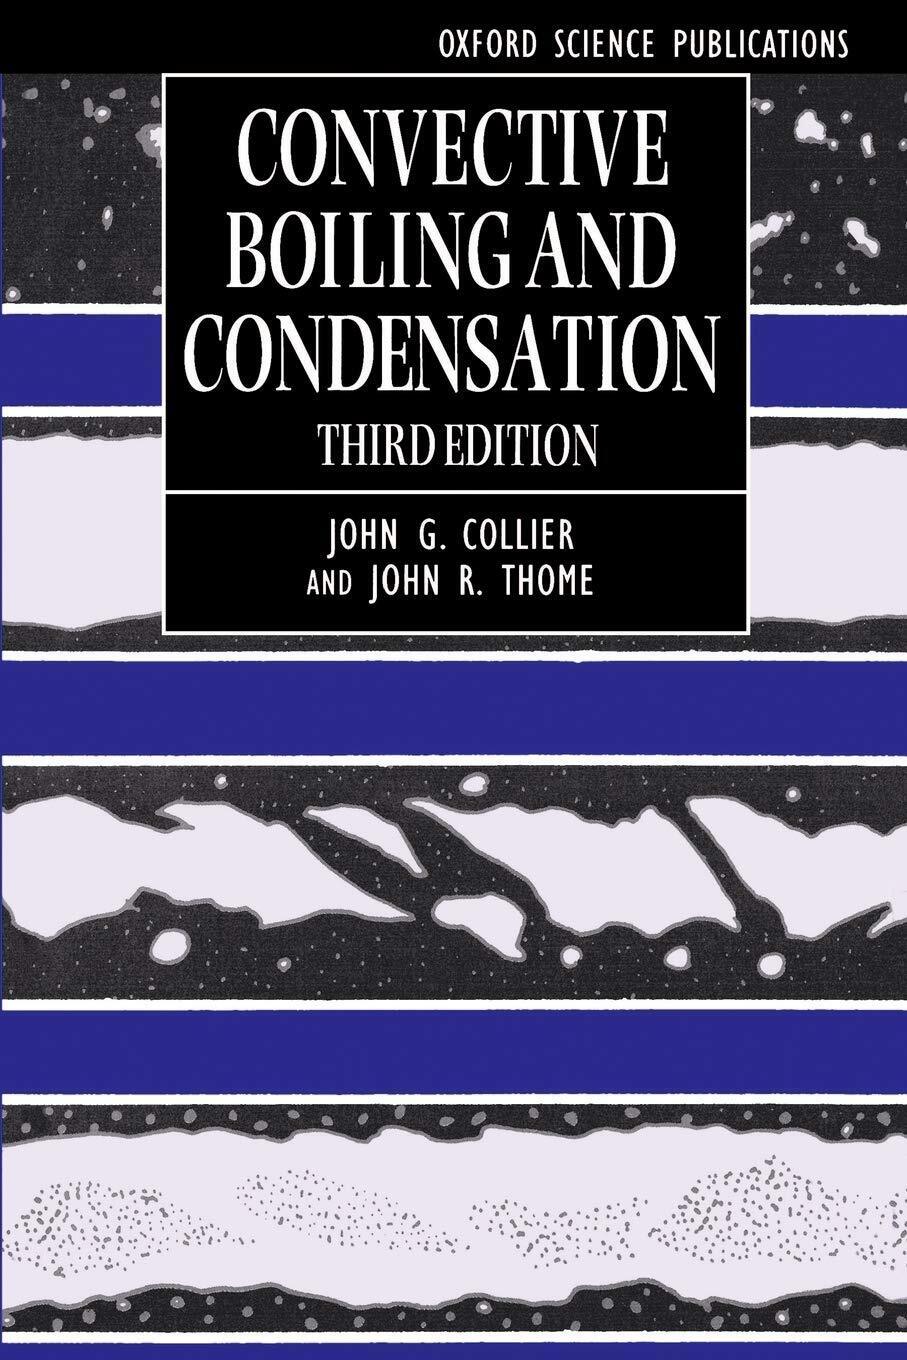 Convective Boiling and Condensation - Oxford, 1996